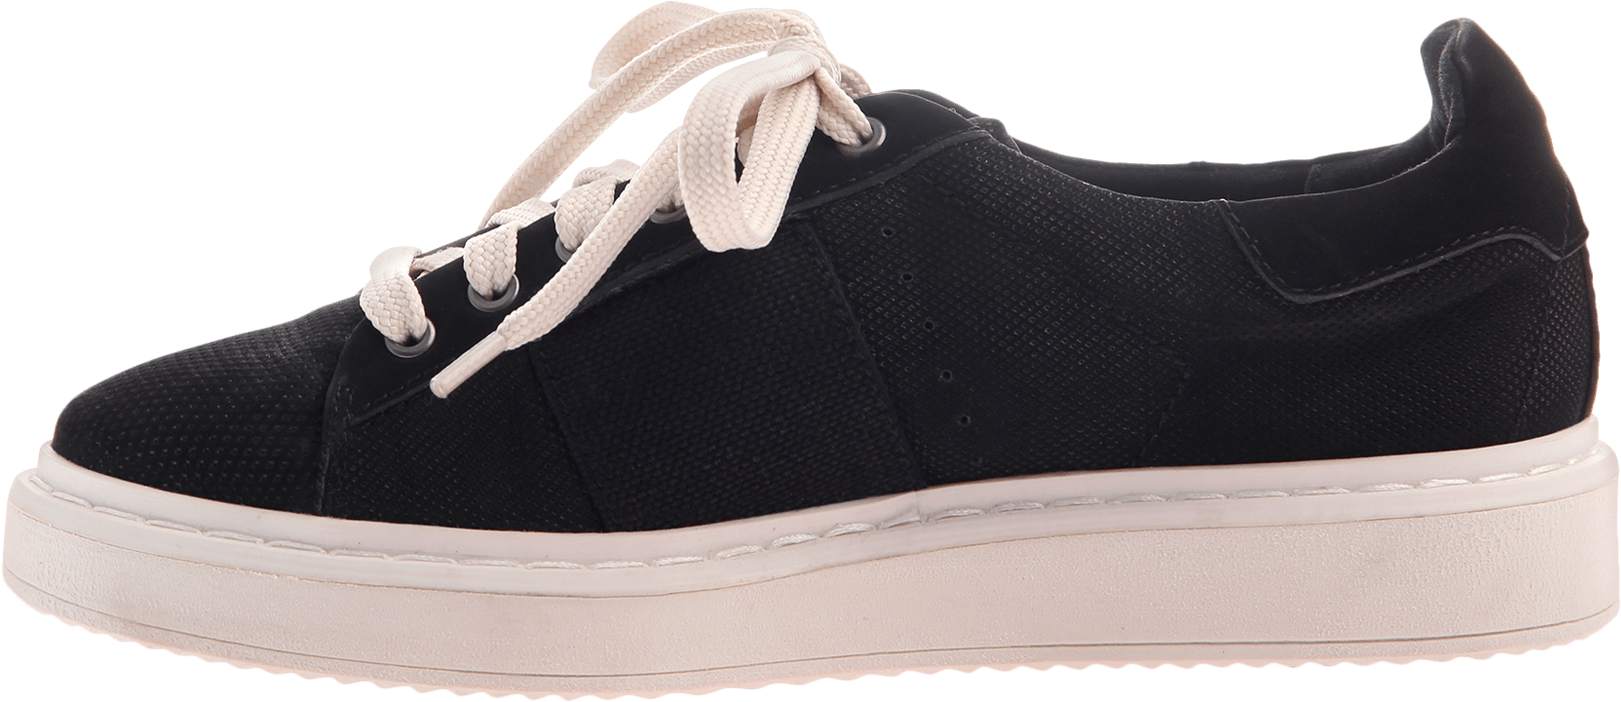 Normcore Women's Sneaker In Black Inside View - Otbt Normcore Women's Lace Up Casual Shoes Black : (1782x1782), Png Download